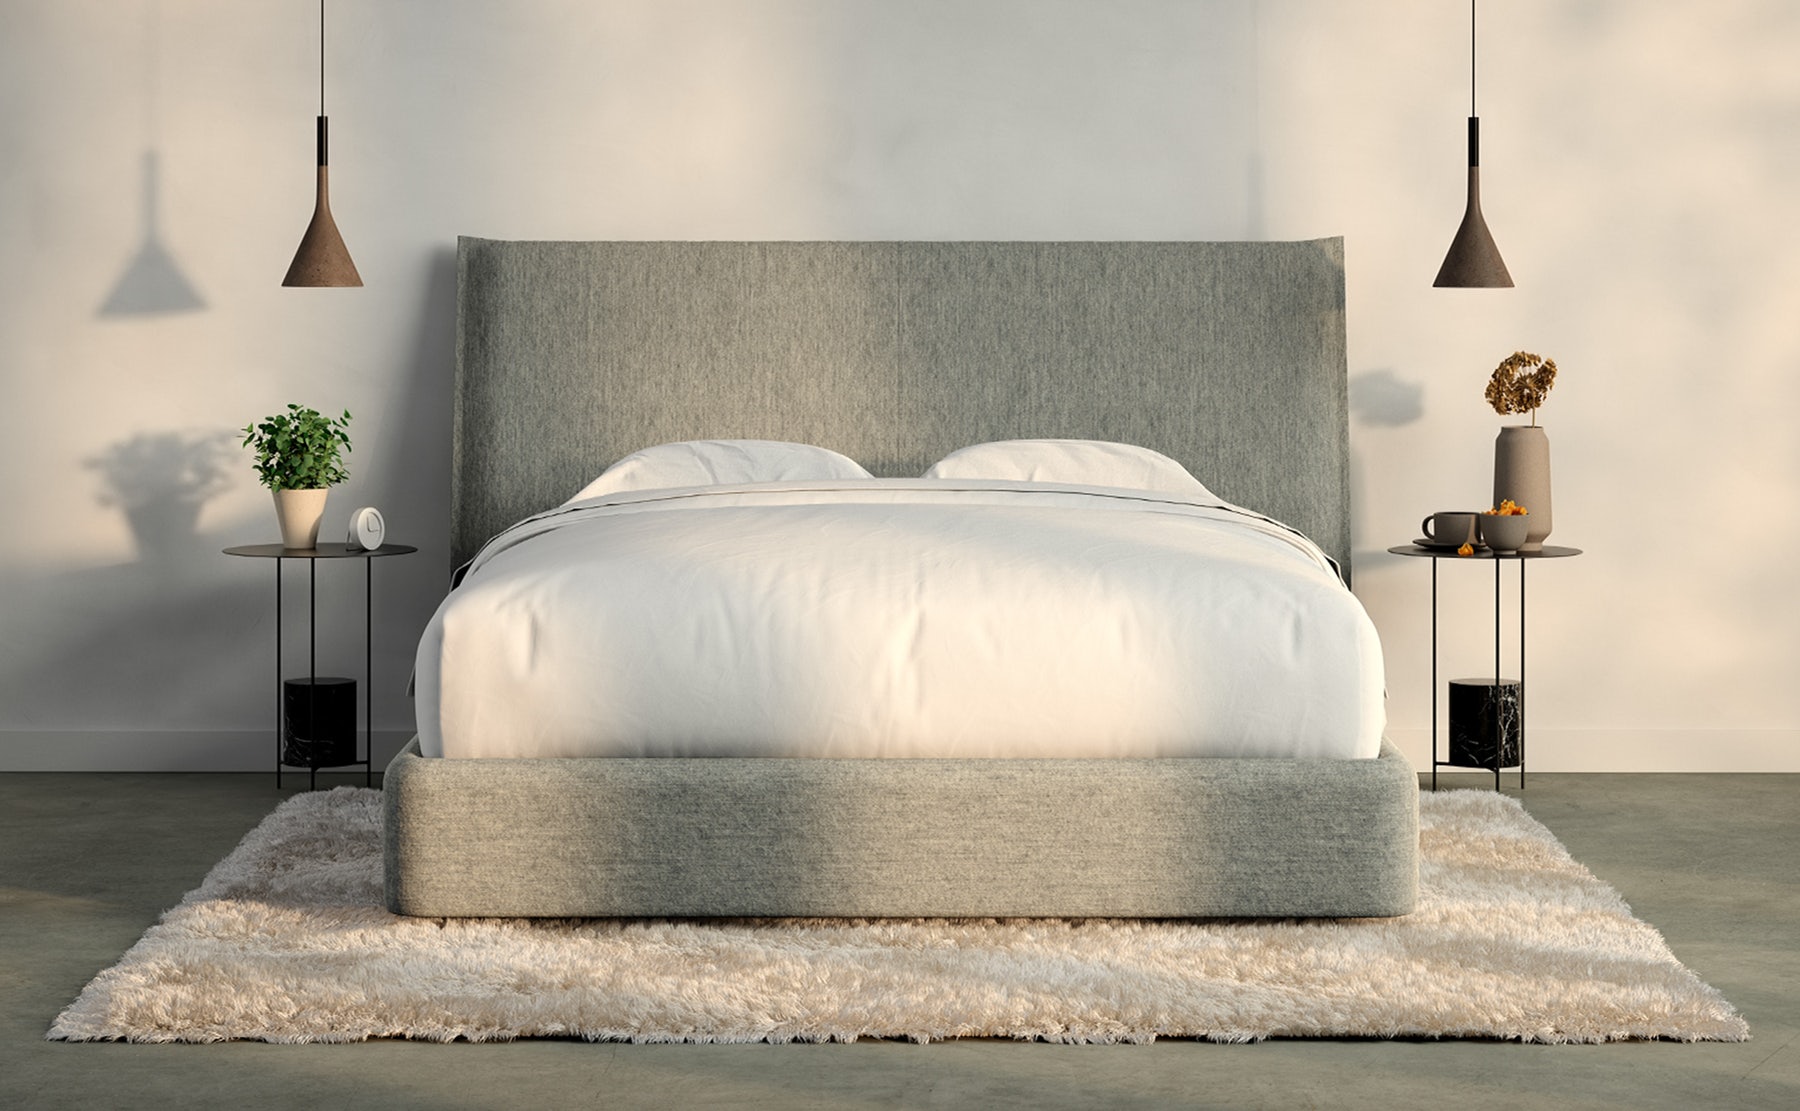 Mattress Sizes And Bed Dimensions Guide, Are Queen Beds Bigger Than King